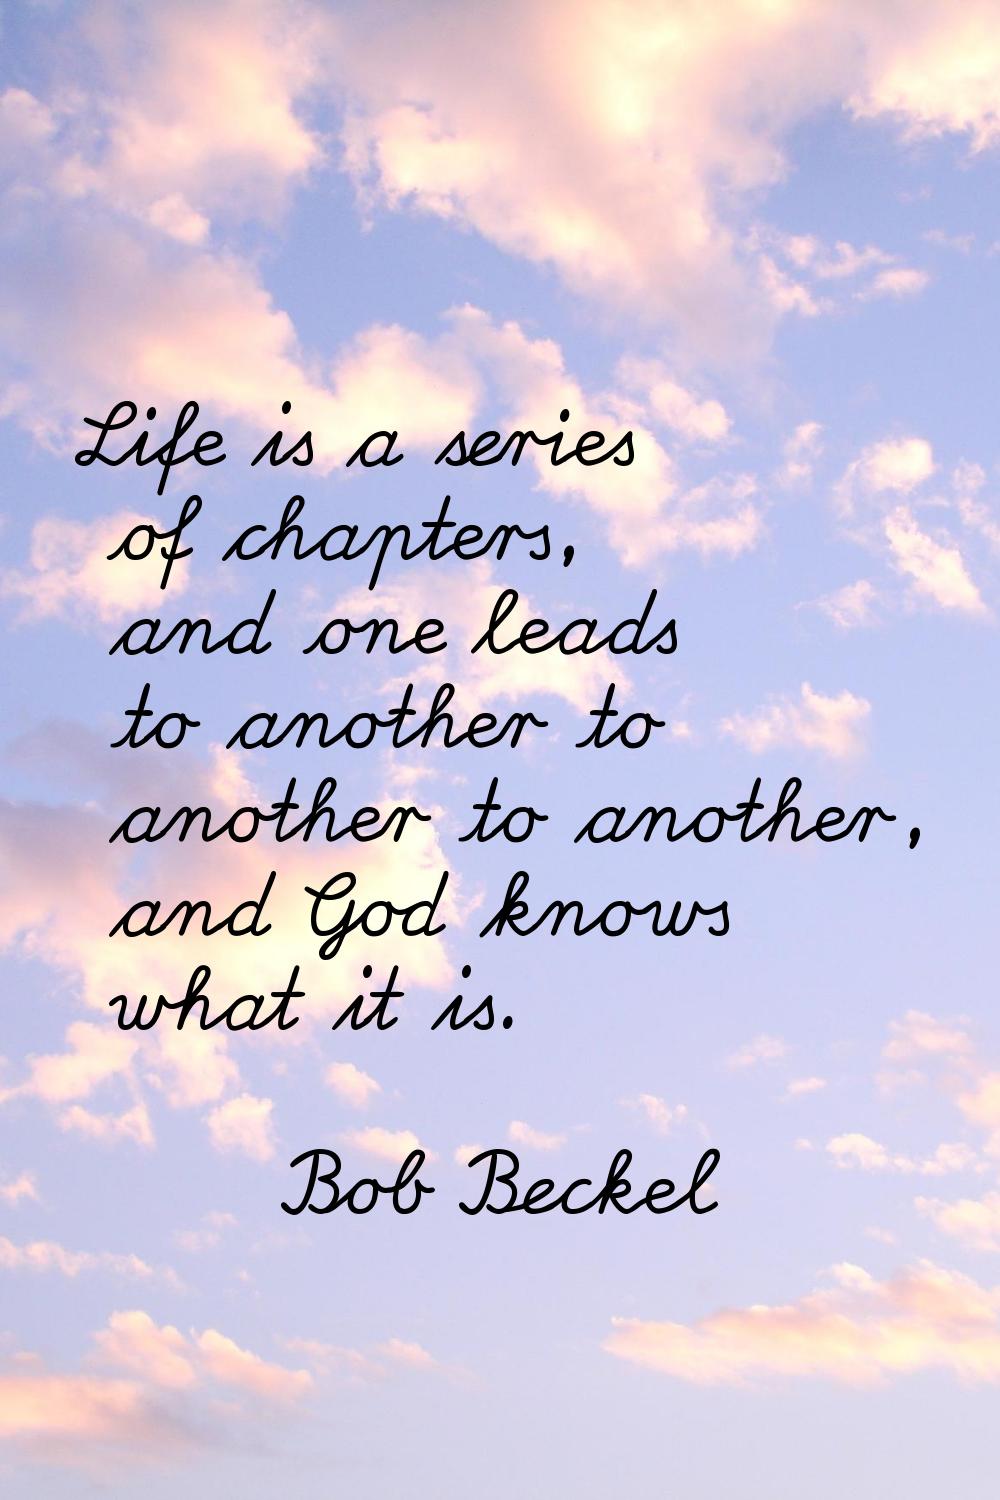 Life is a series of chapters, and one leads to another to another to another, and God knows what it